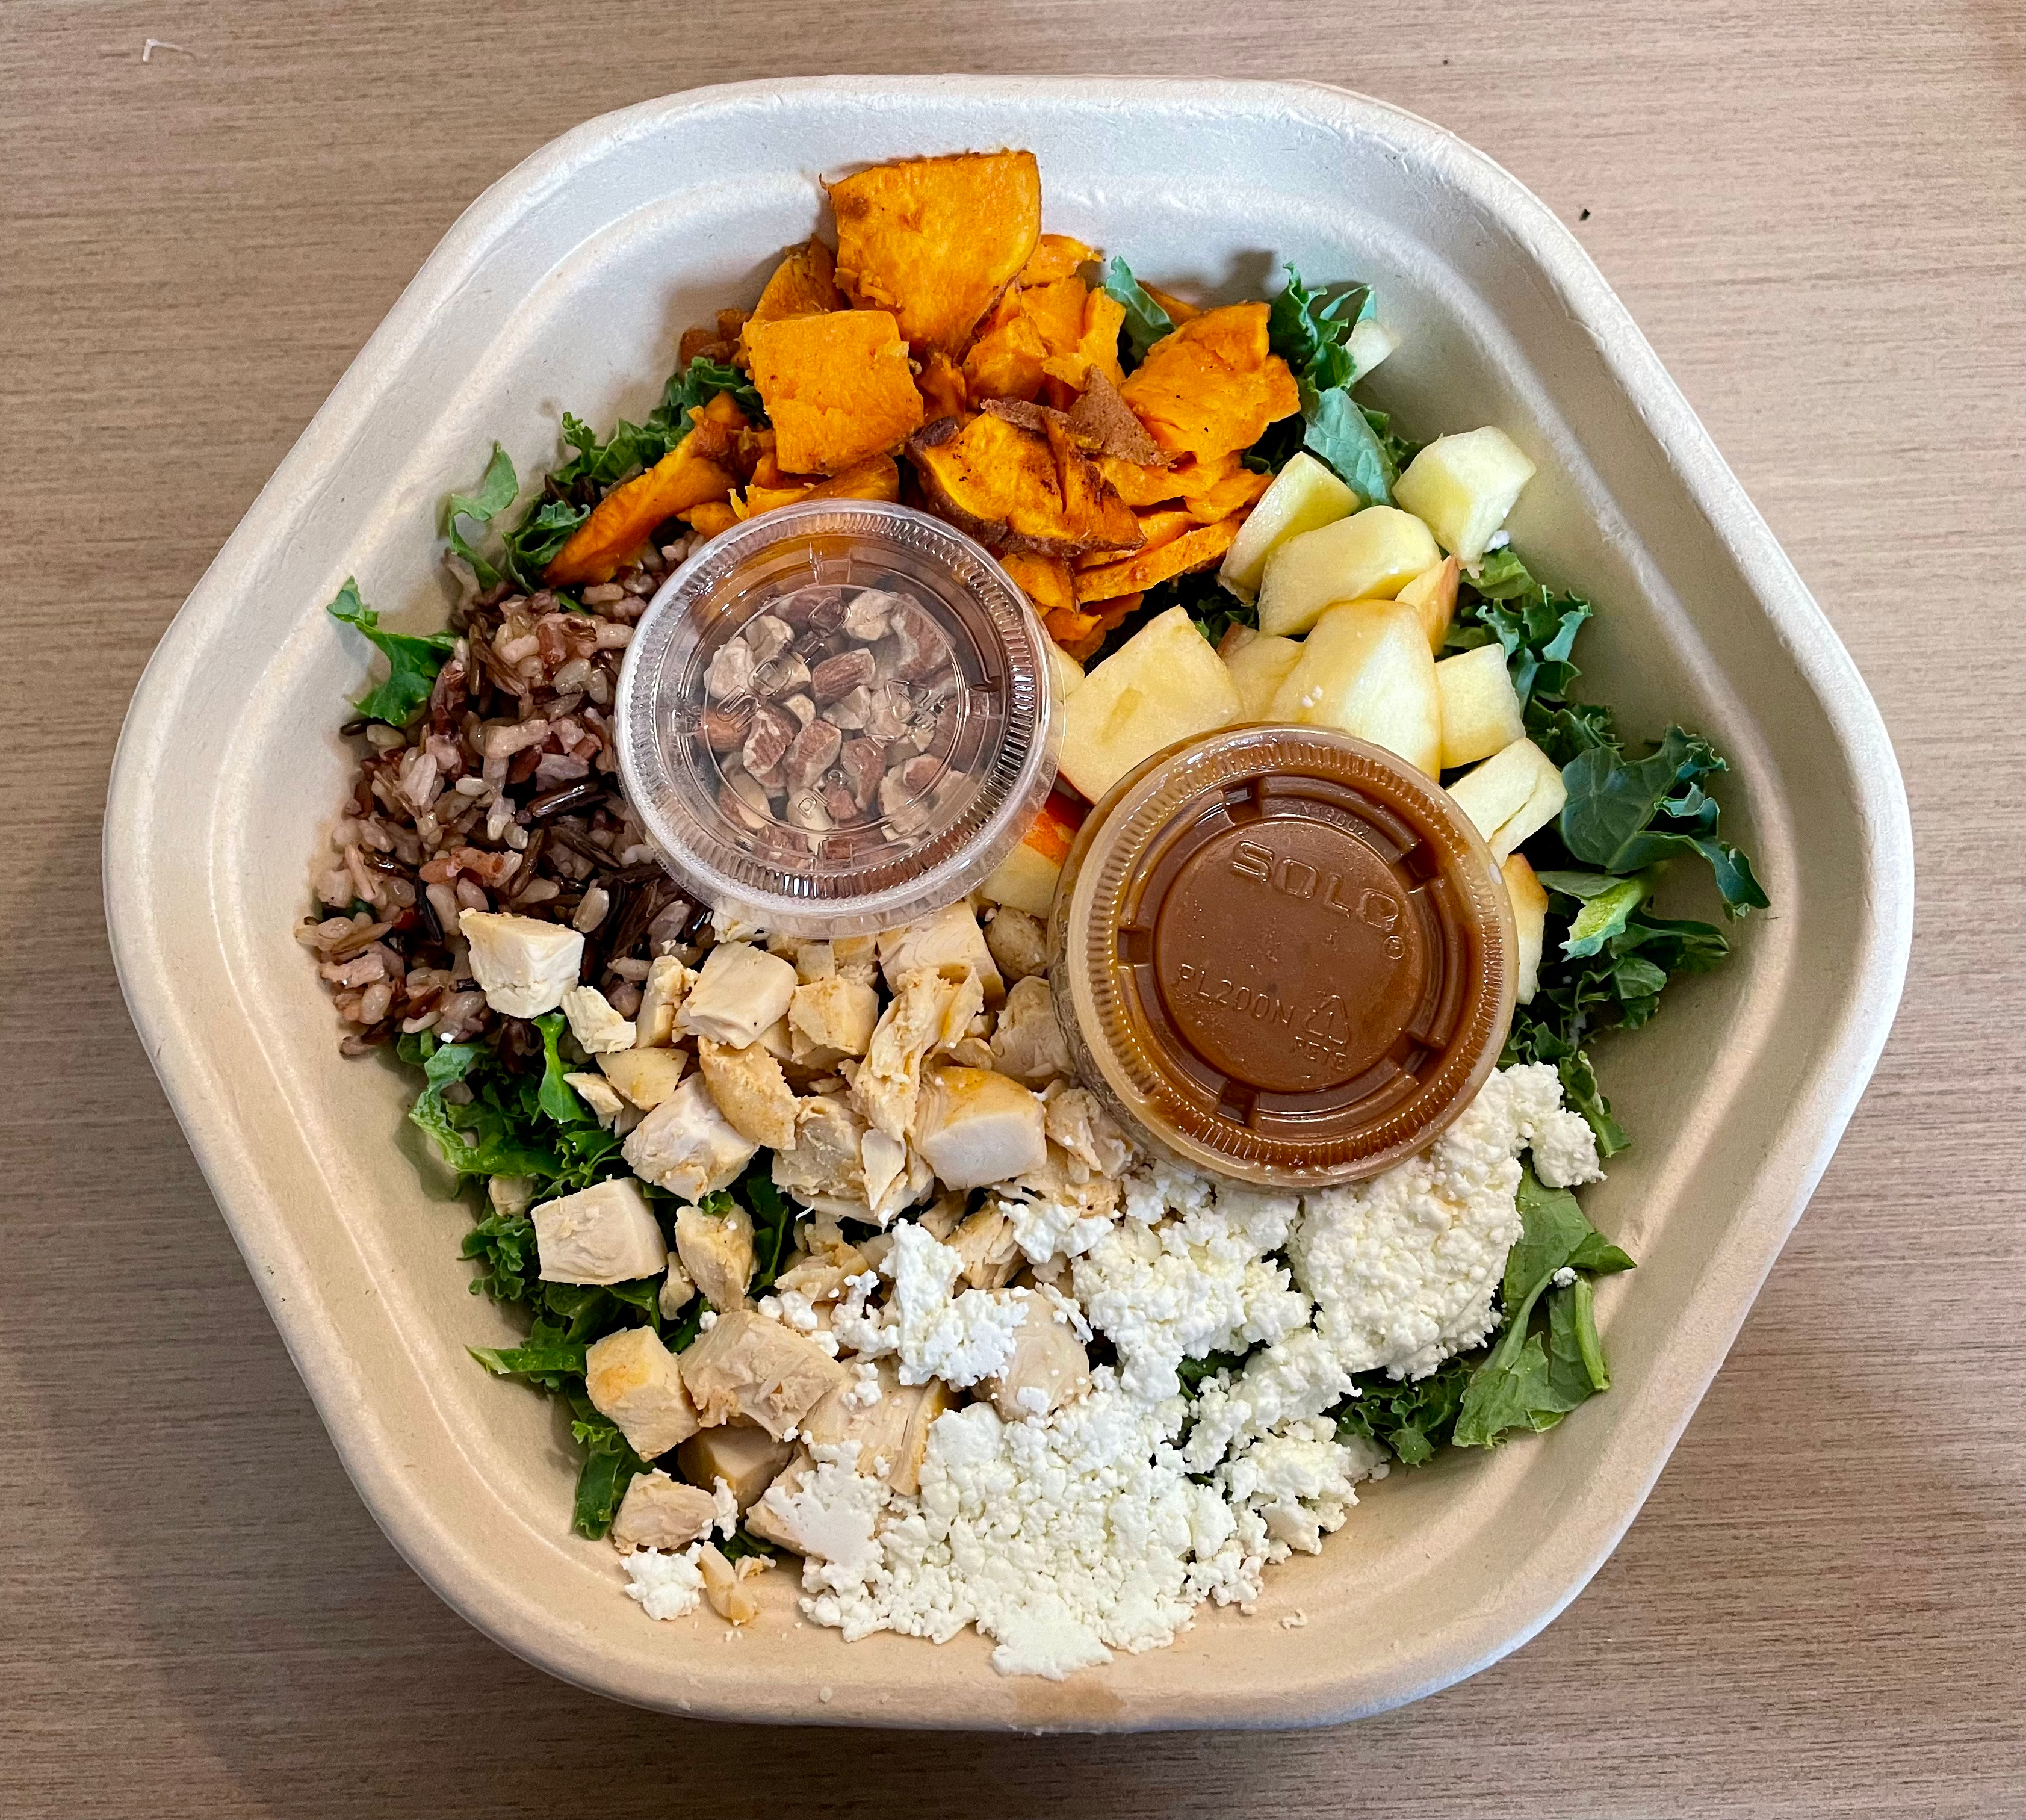 Harvest Bowl from Sweetgreen